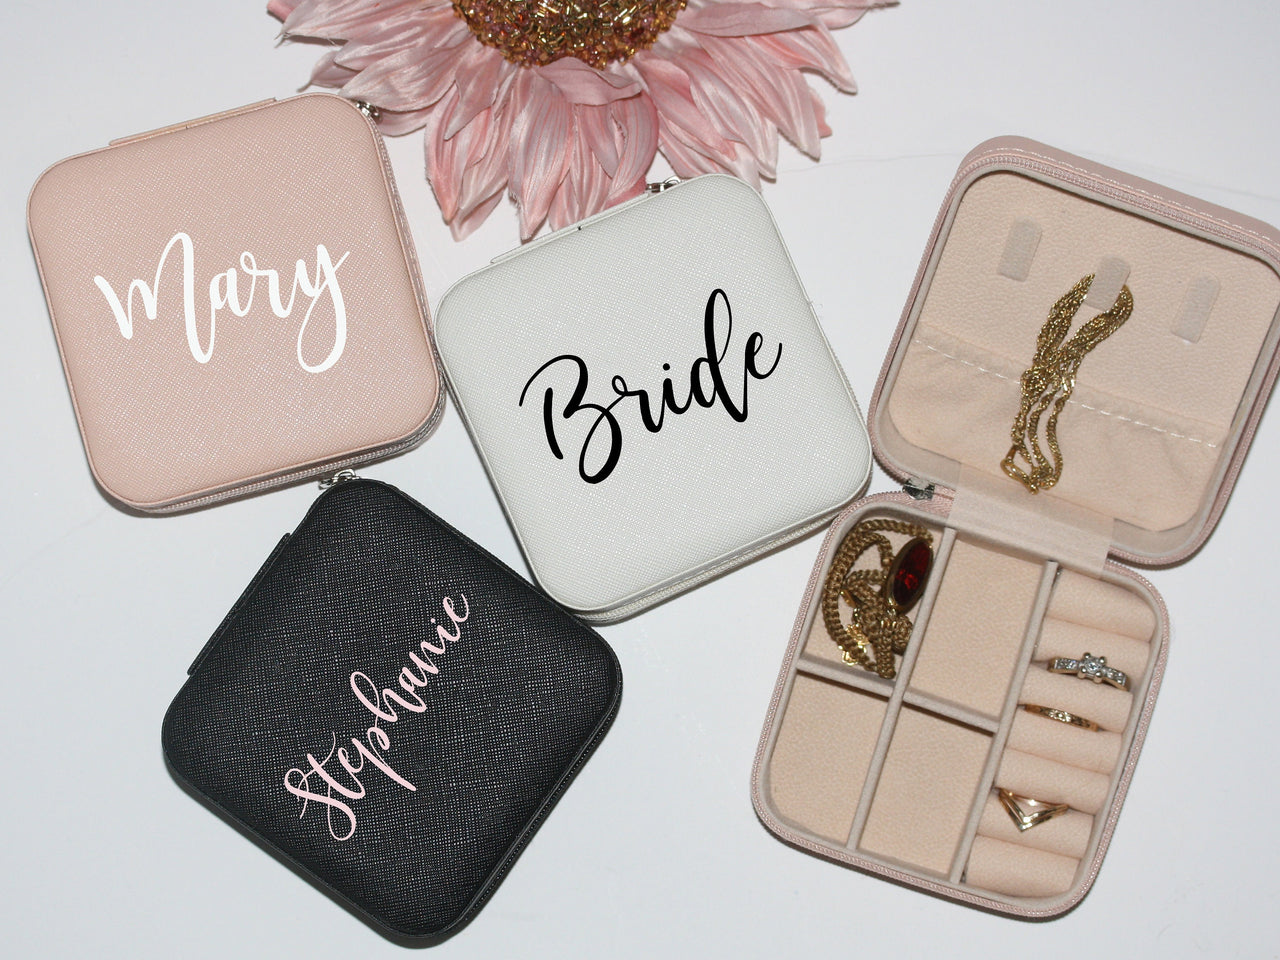 Personalized Travel Jewelry Box with name